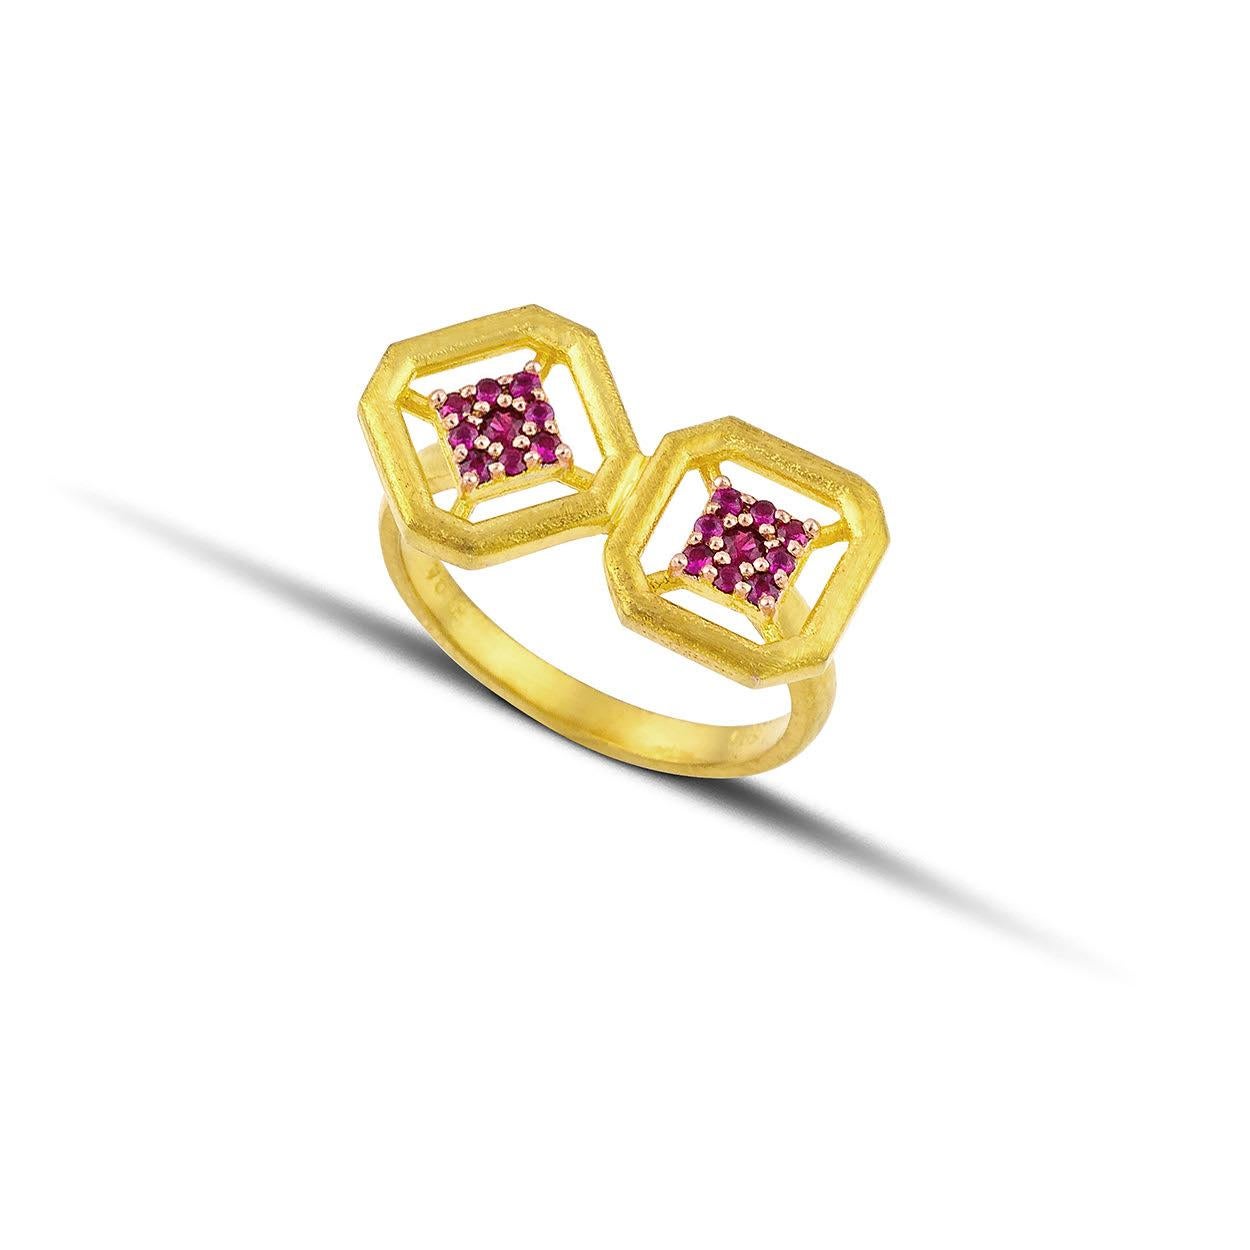 100% recycled 14K Yellow Gold, plated with 22K Gold

Ruby

Size: on order

Ancient Gold Jewelry collection inspired by the antiquity, for young women and men, called Apollonian.

Apollonian is

The beauty of youth
The antiquity
The love of arts
The